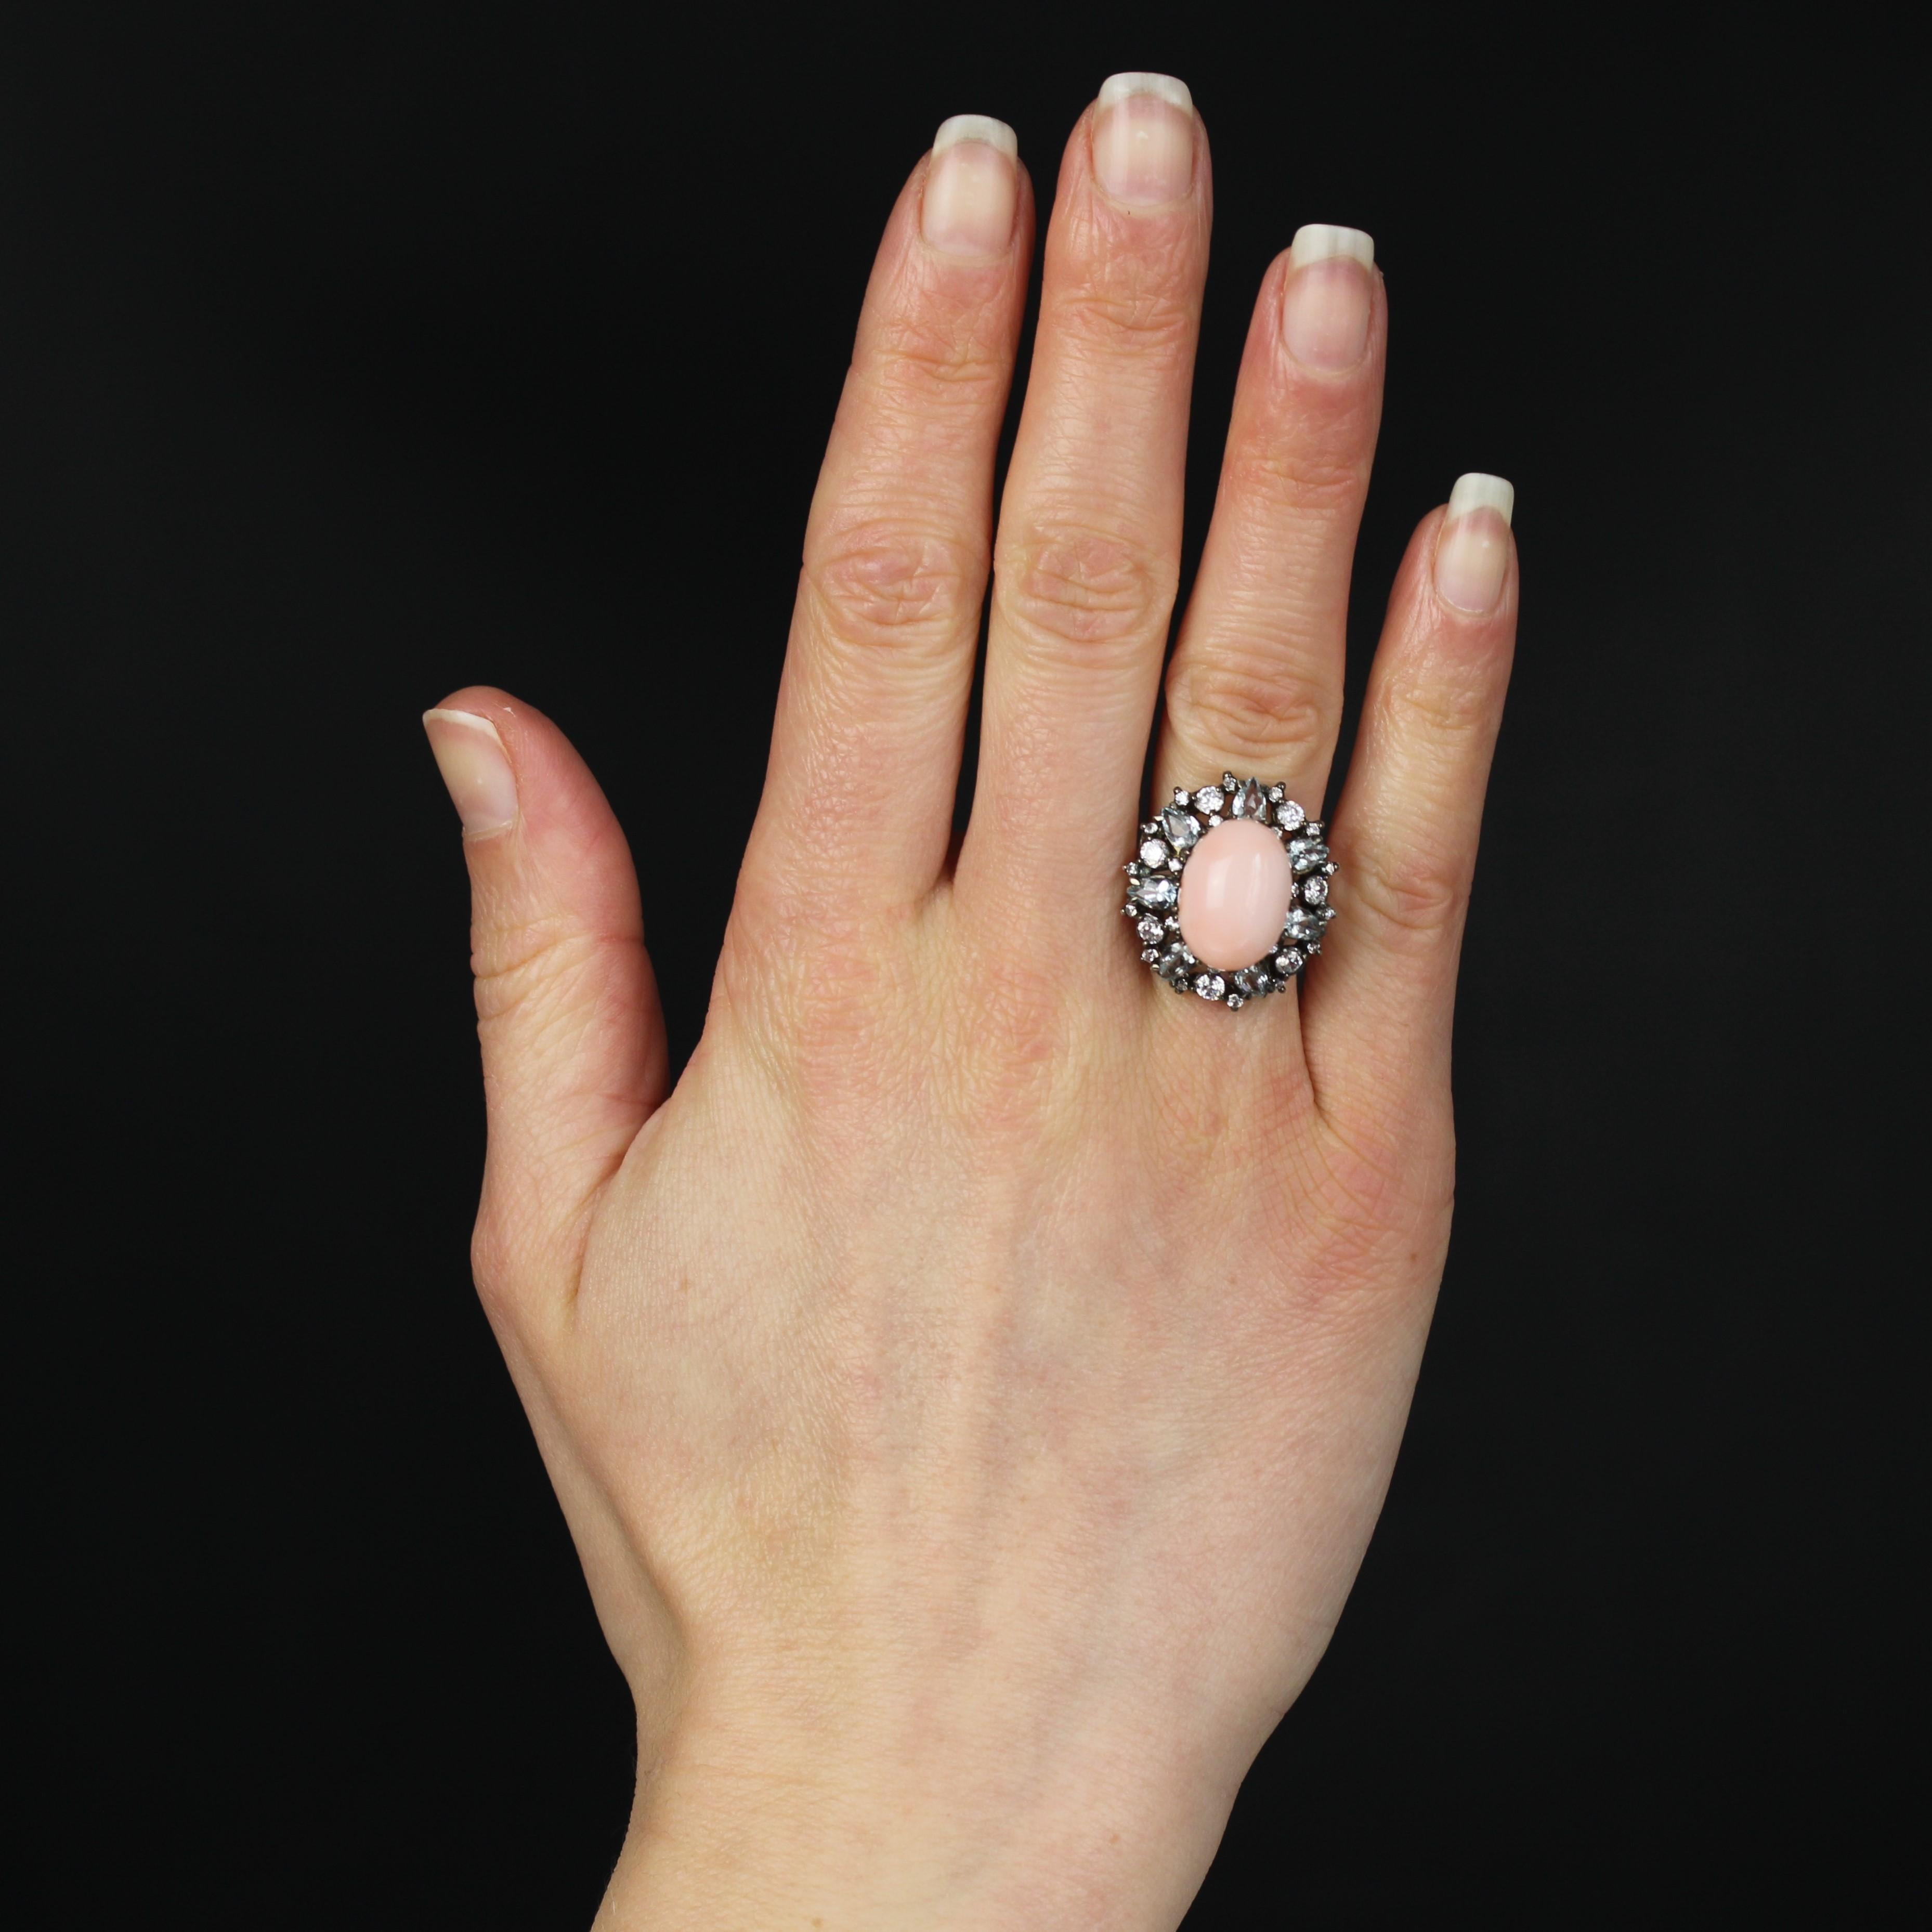 Ring in silver.
This important cocktail ring features an angel-skin coral cabochon in the center, held in place with claws. The coral is surrounded by alternating pear-cut aquamarines and small zirconium crystals of different sizes. The basket is